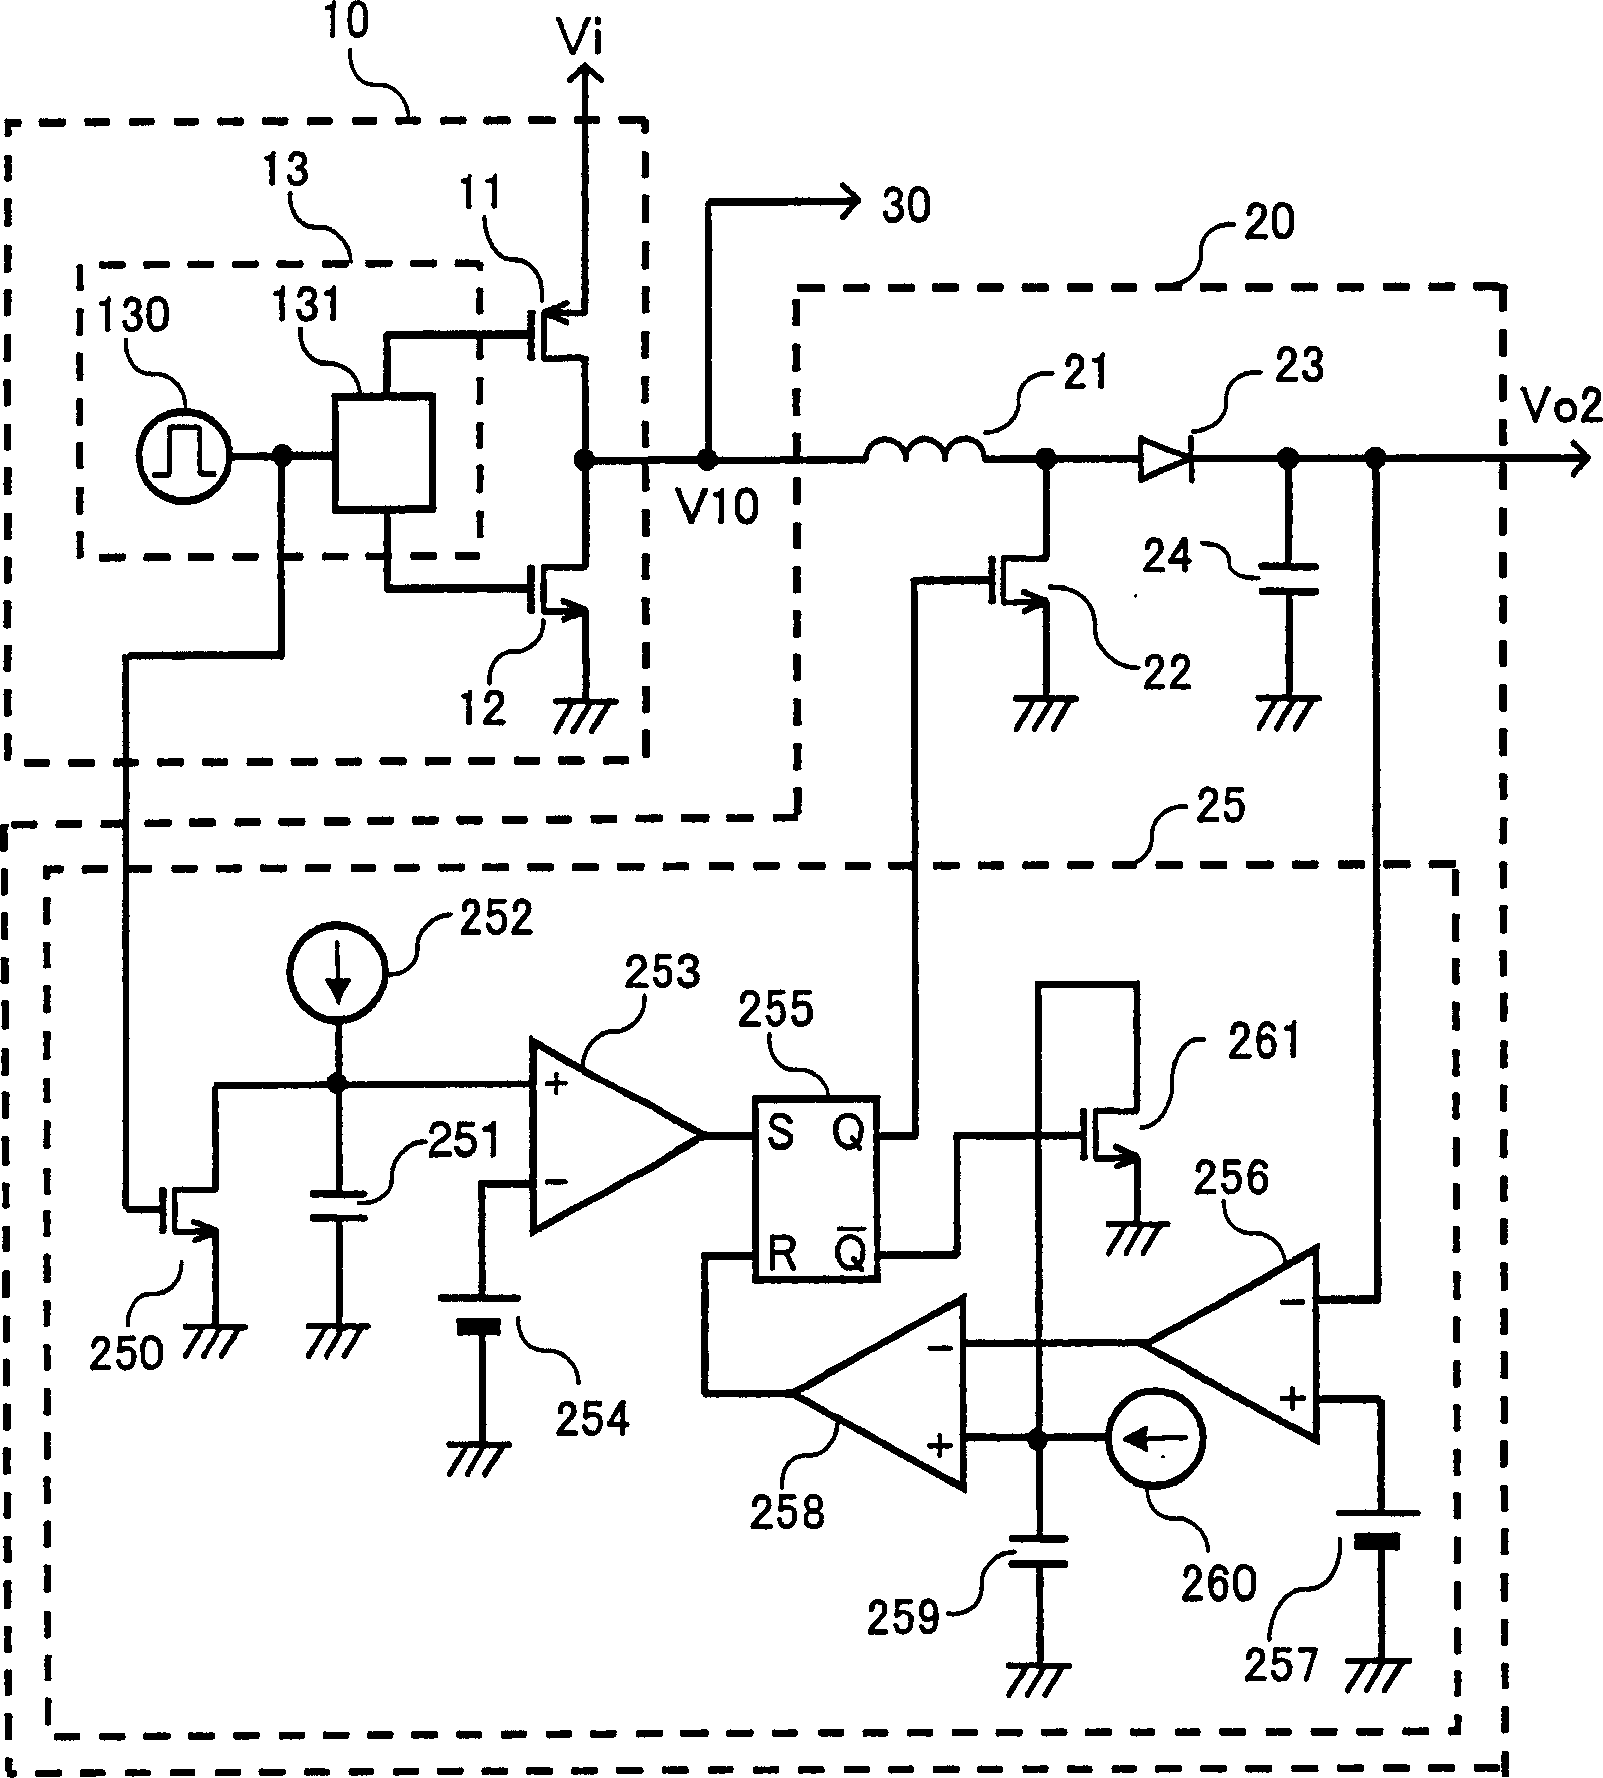 Multi-output power supply circuit